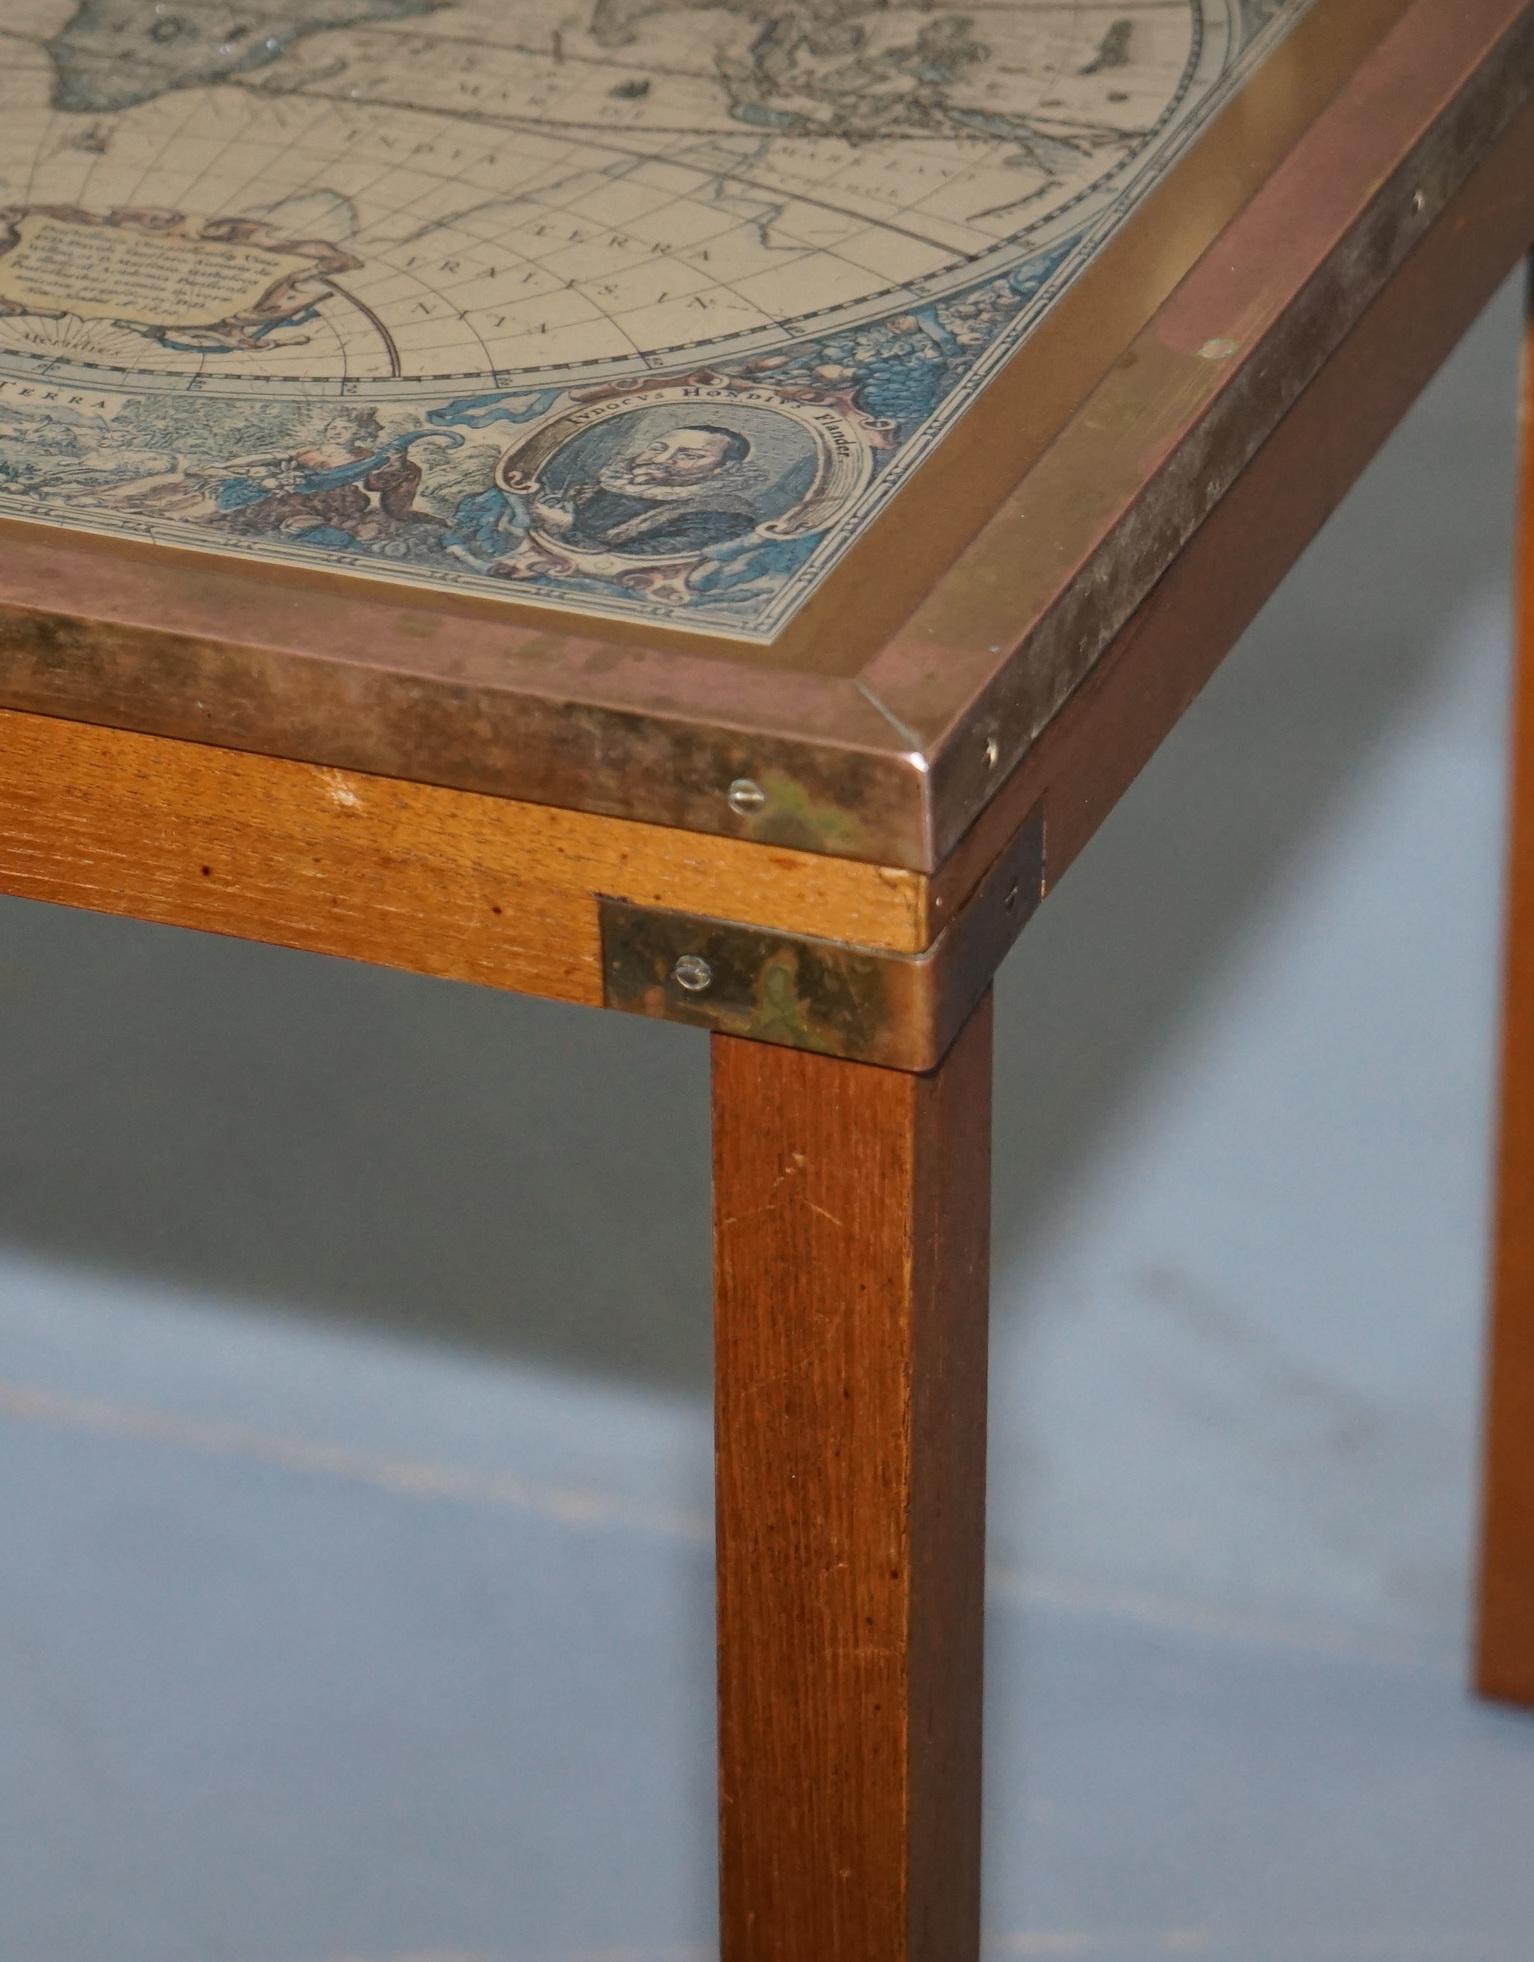 Nest of Three Vintage Campaign Tables with Global Maps Design Brass Corners 1